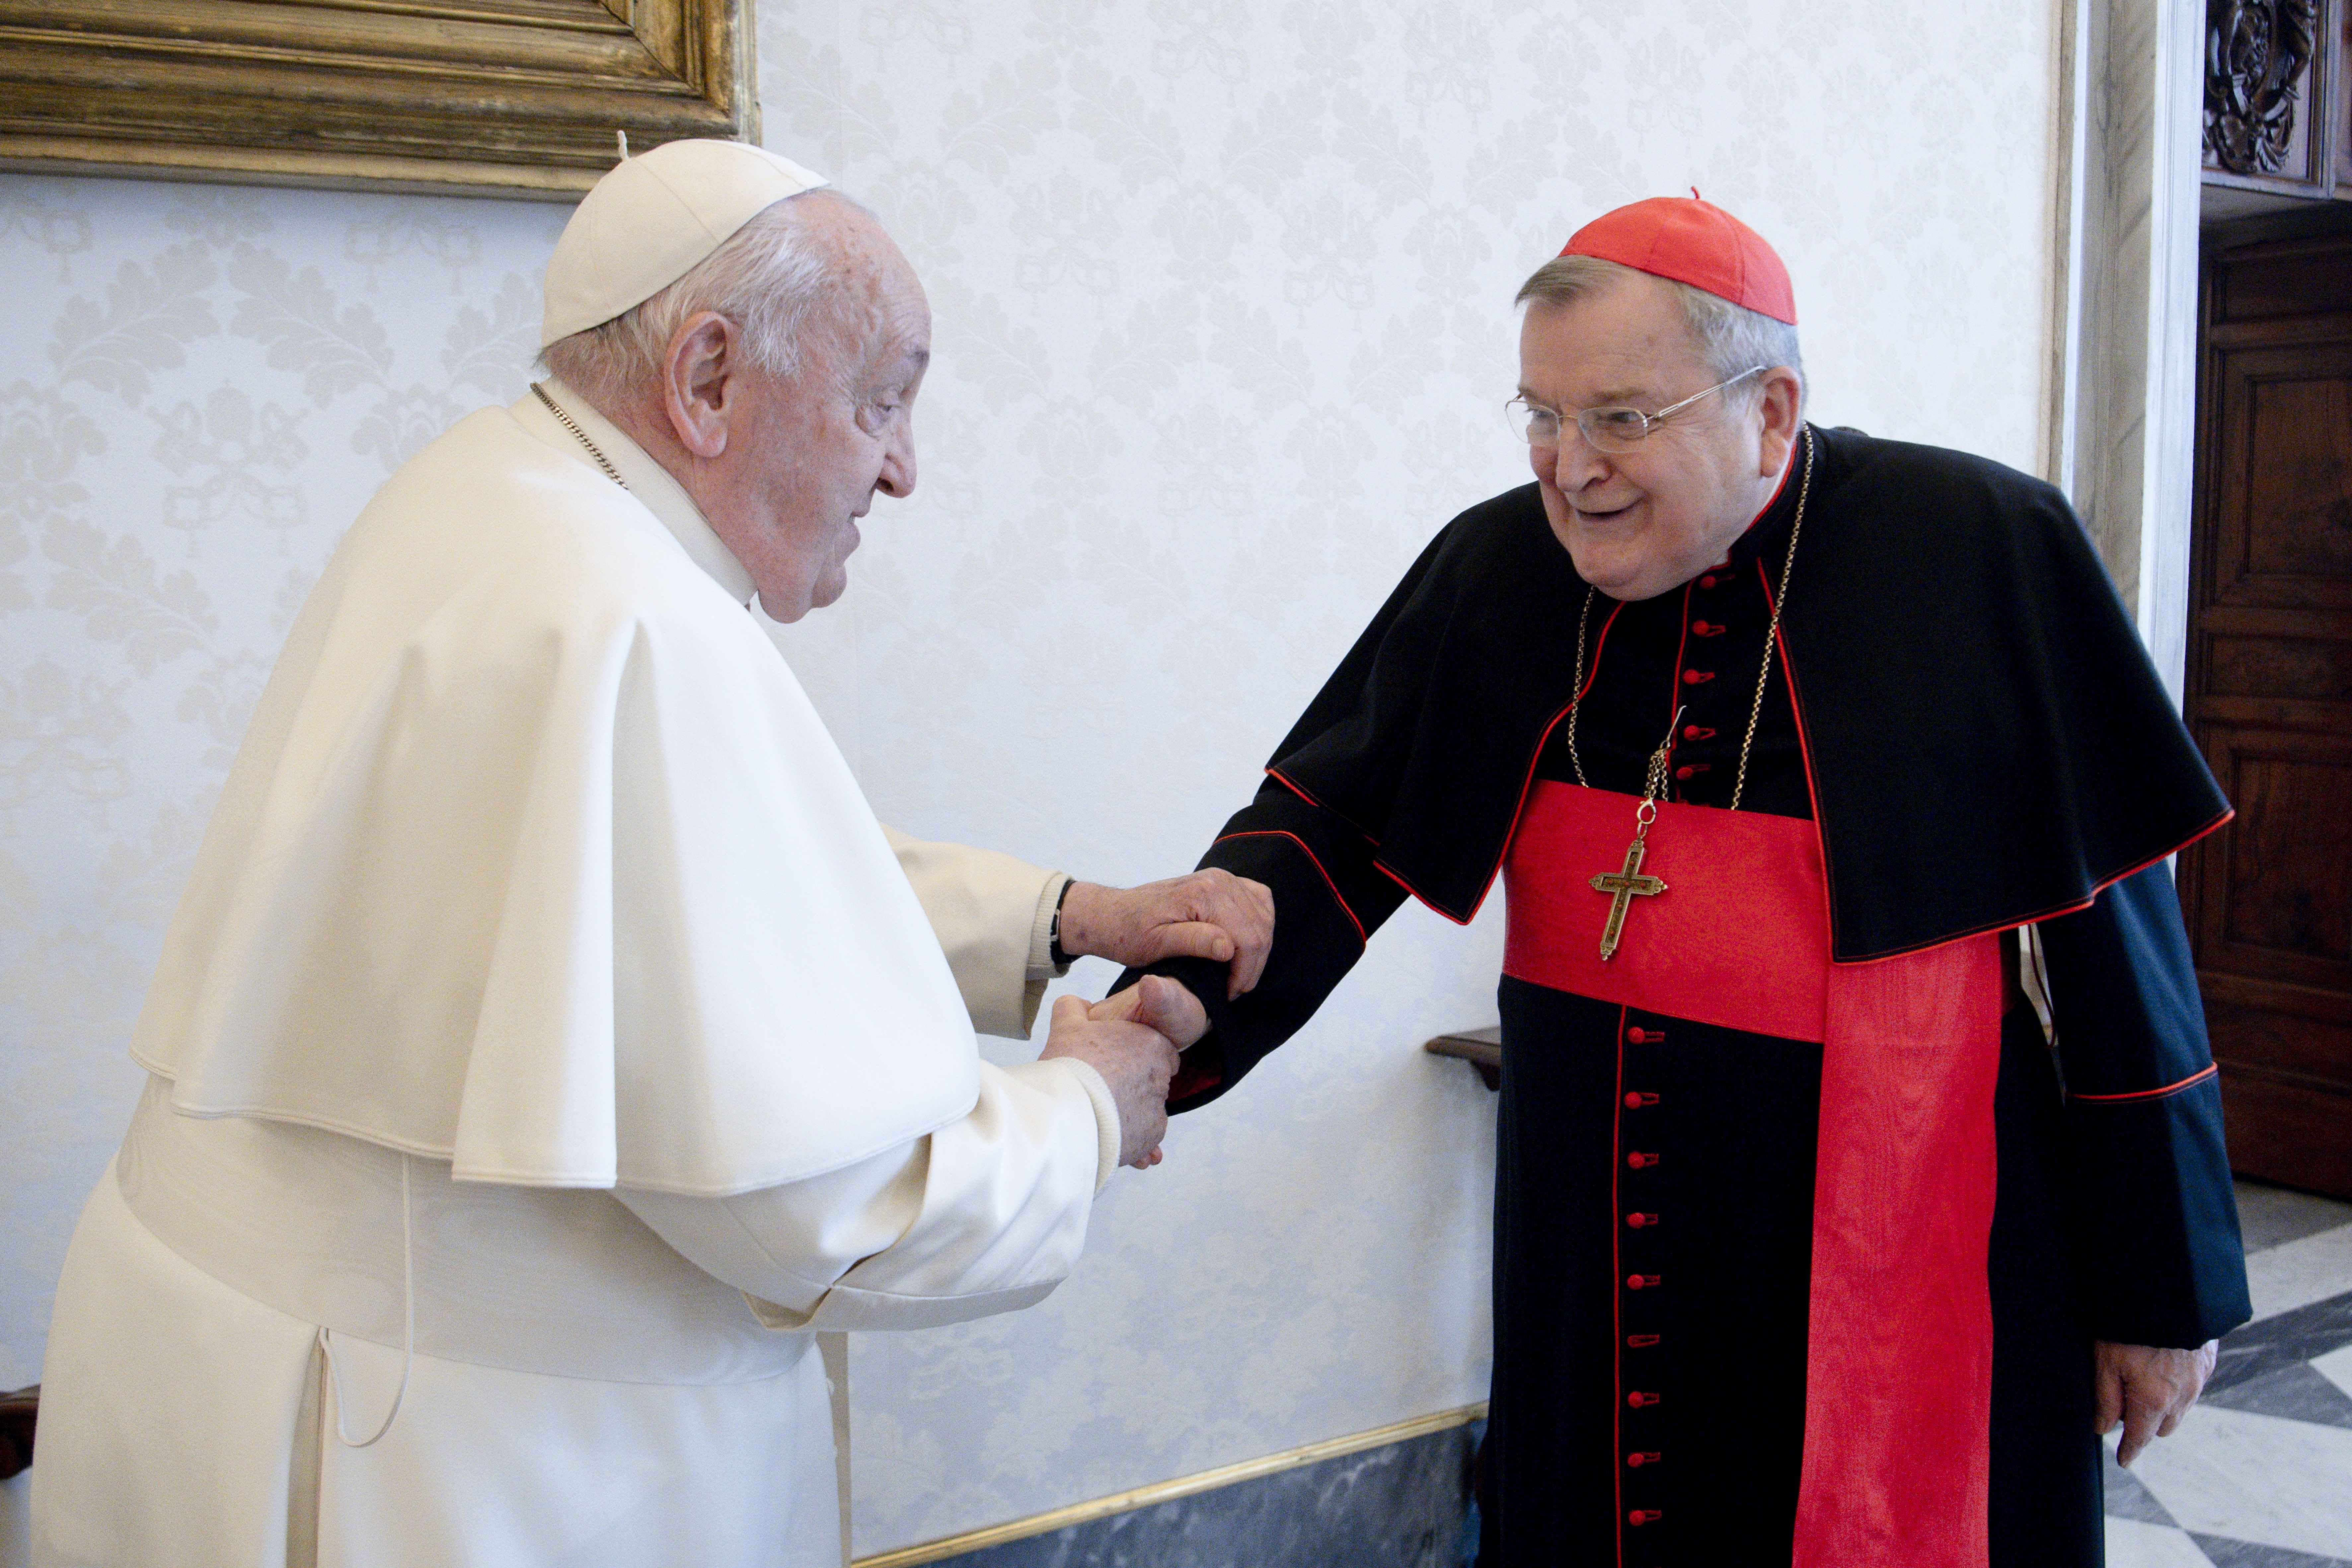 Pope Francis meets with Cardinal Burke amid salary, apartment controversy